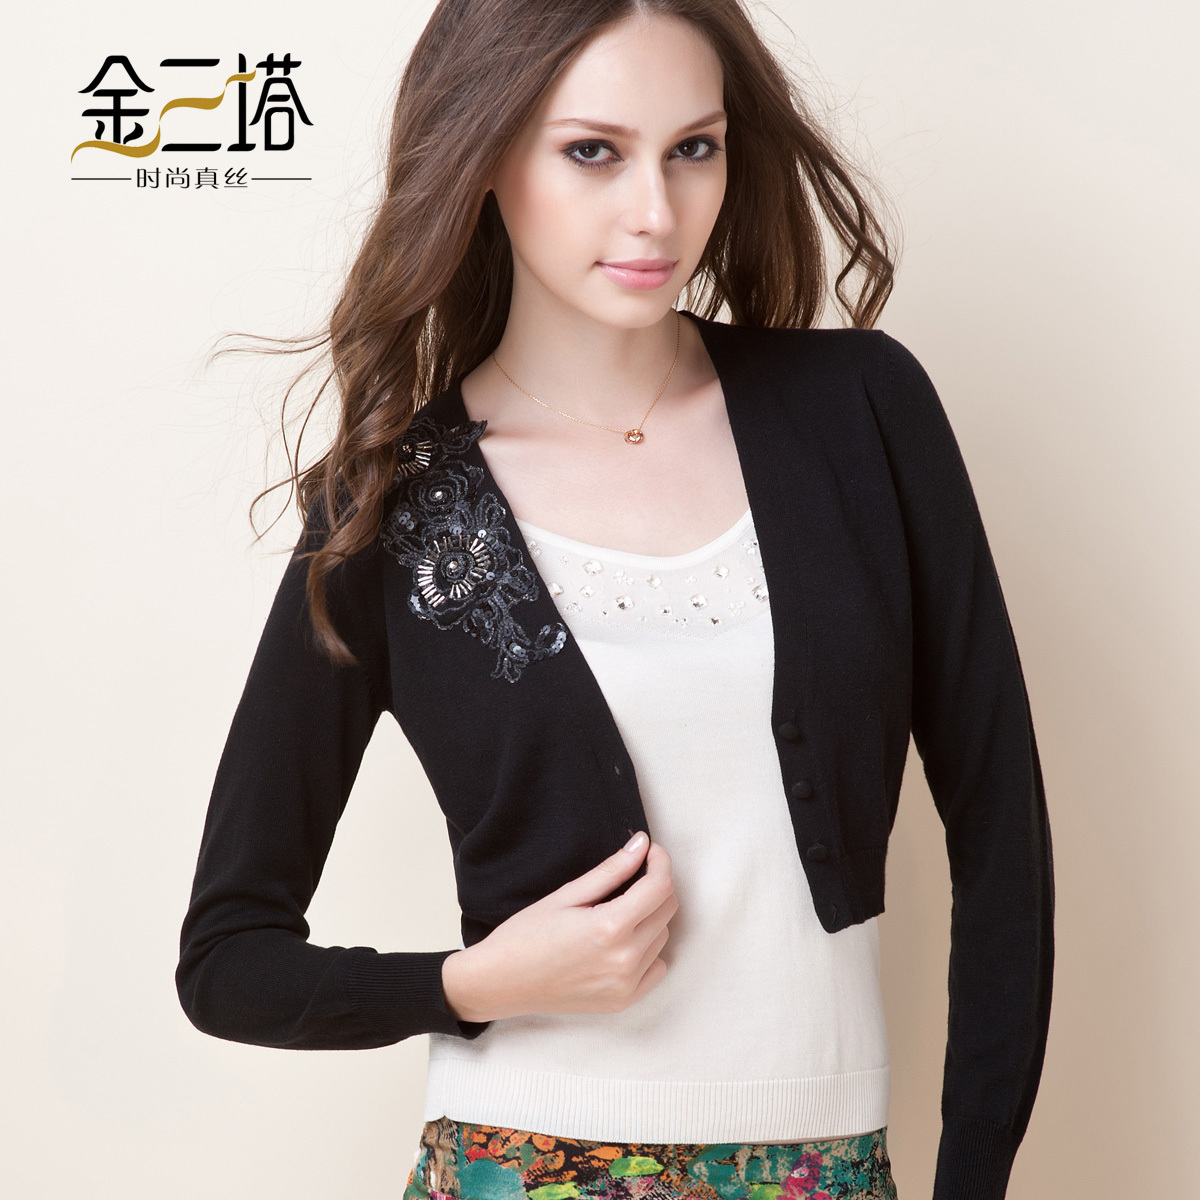 Spring new arrival mulberry silk cashmere blended fabric silk applique stitch long-sleeve cardigan top shirt